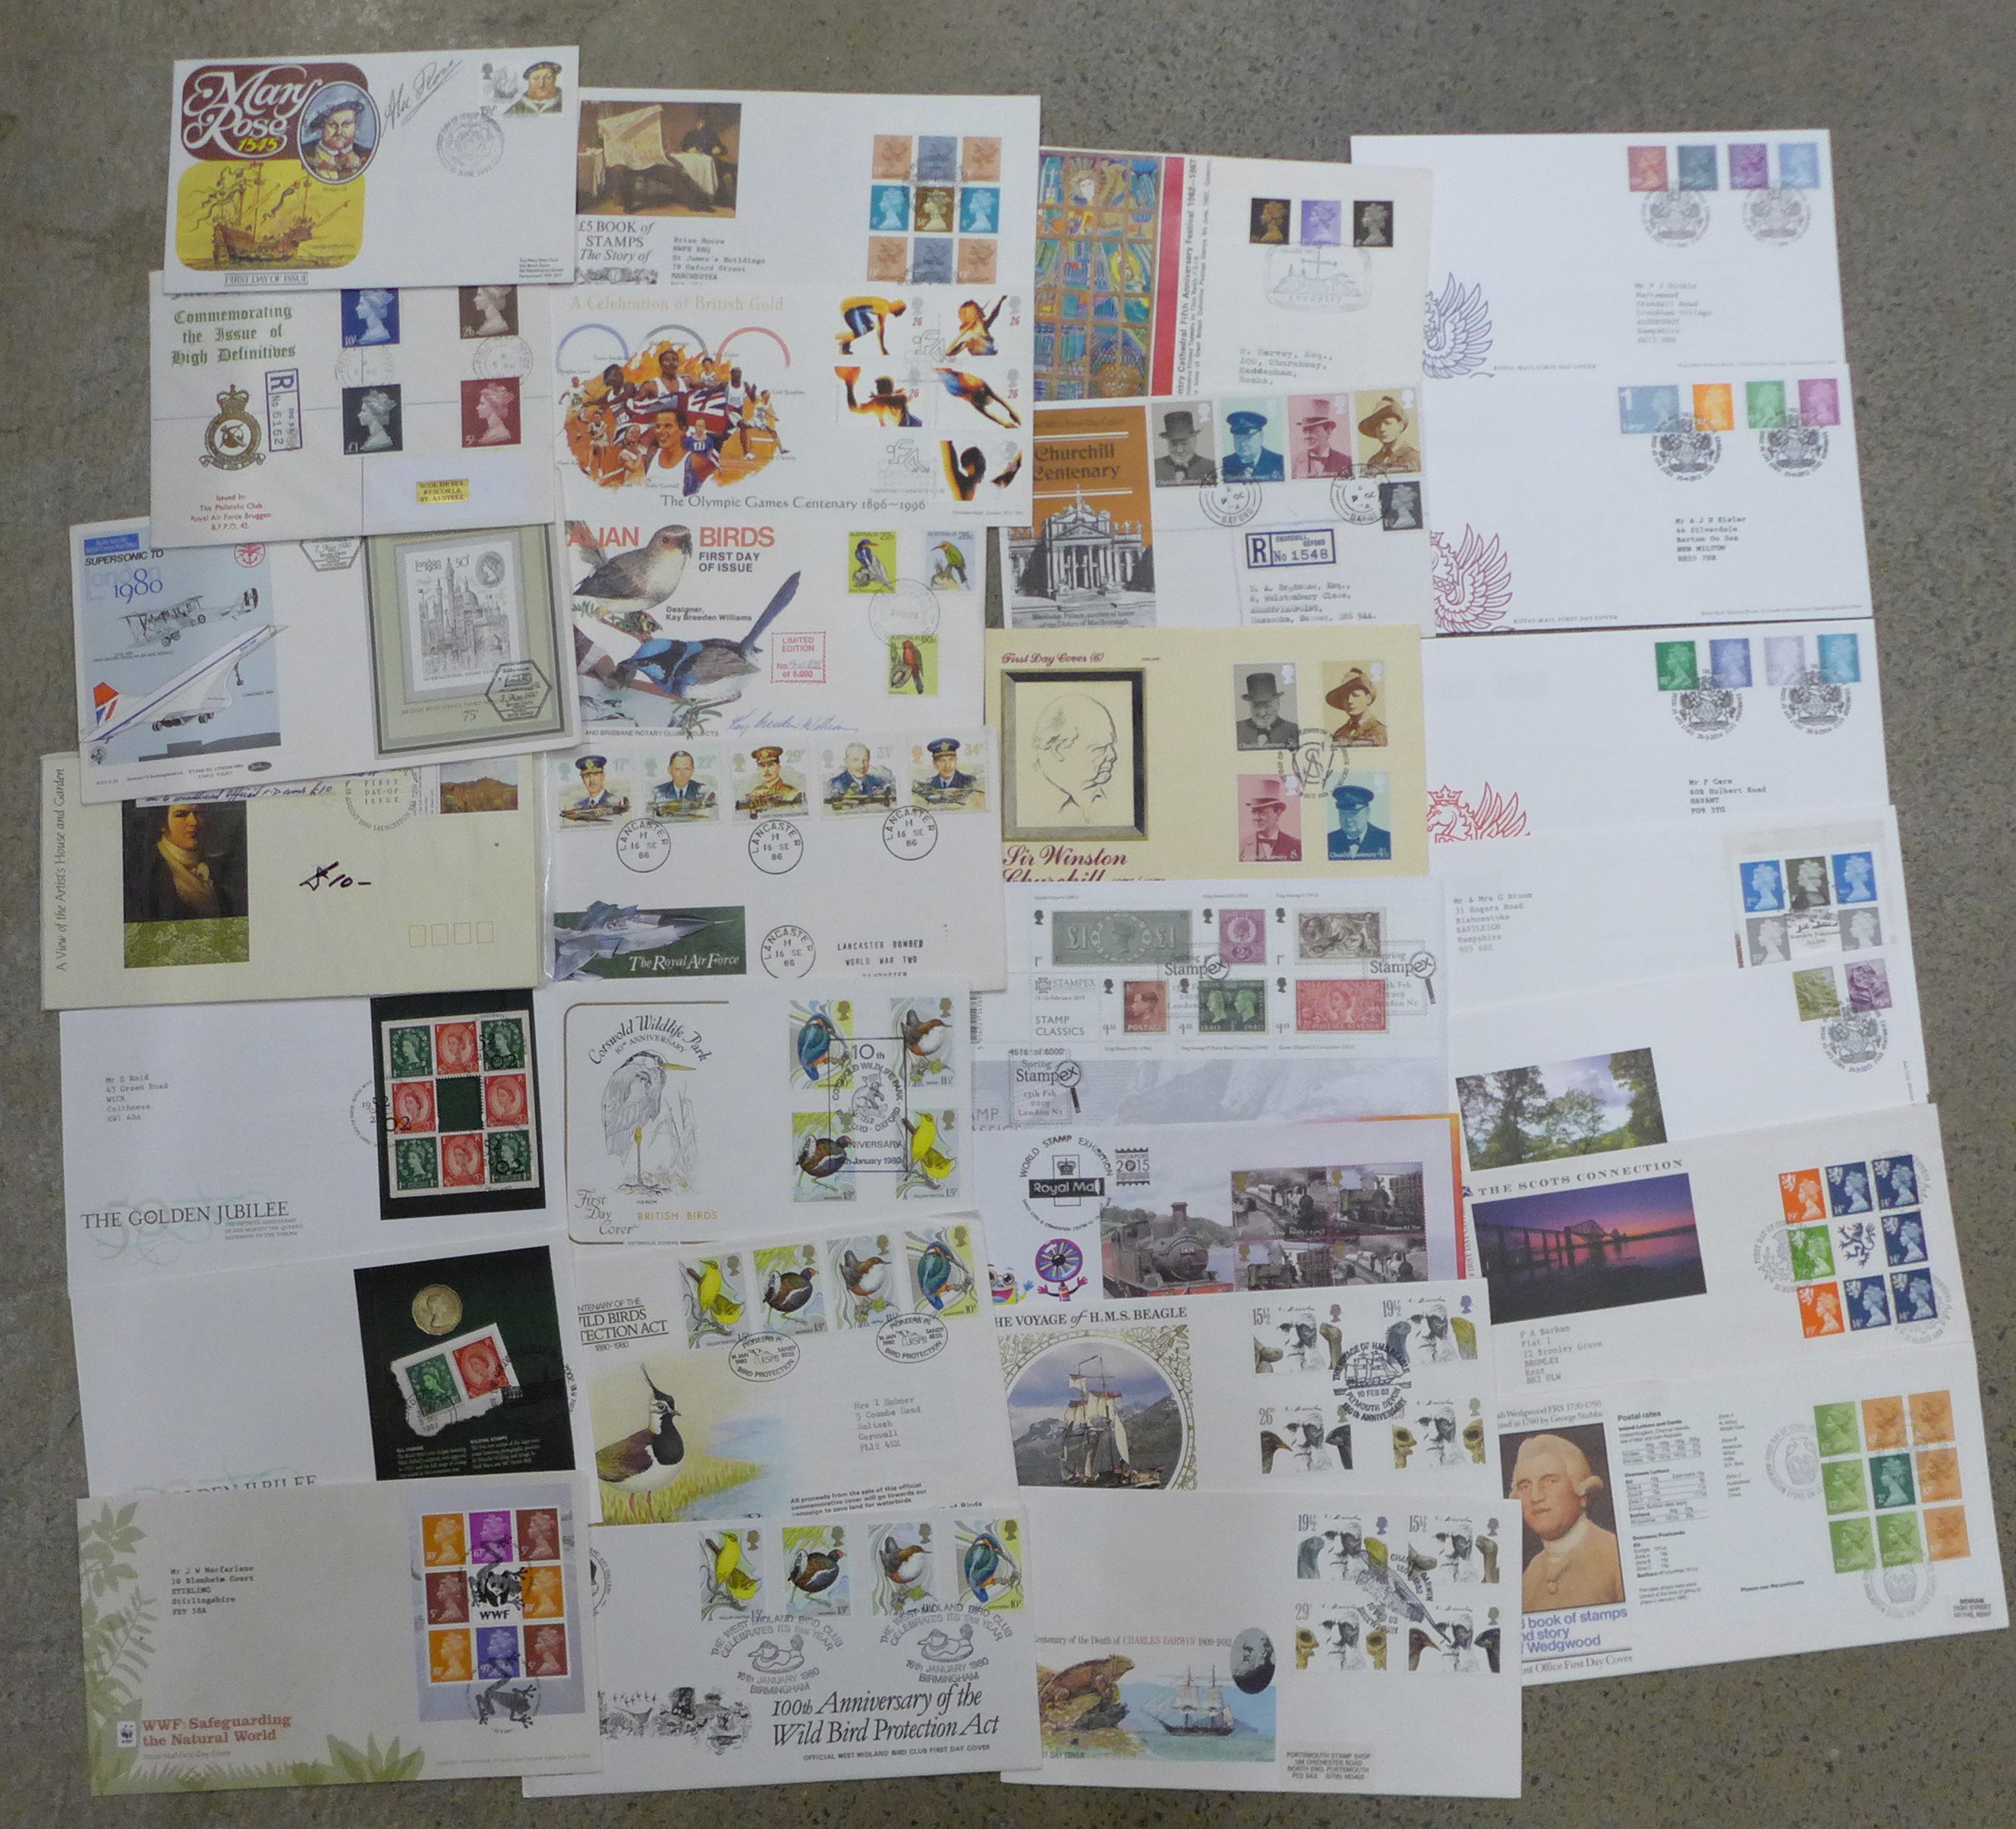 Thirty-one stamp first day covers, including some higher value definitives